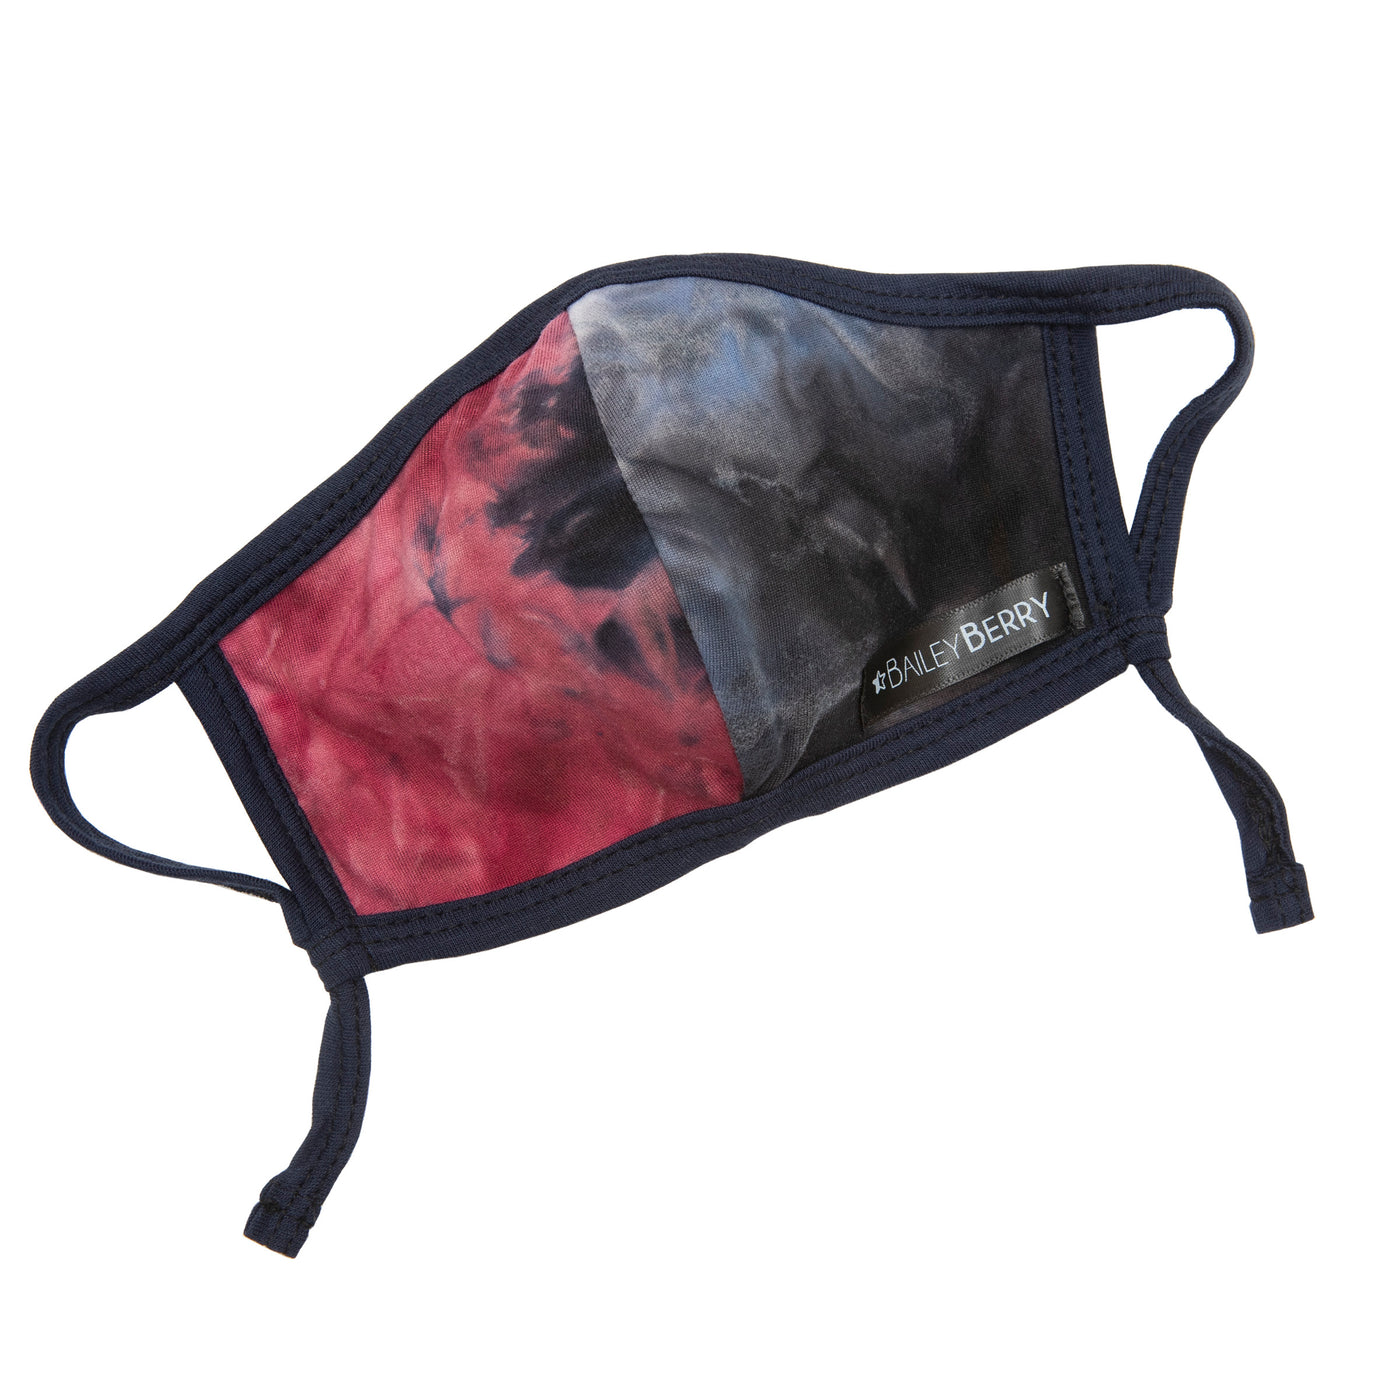 Galaxy face mask with adjustable ear straps